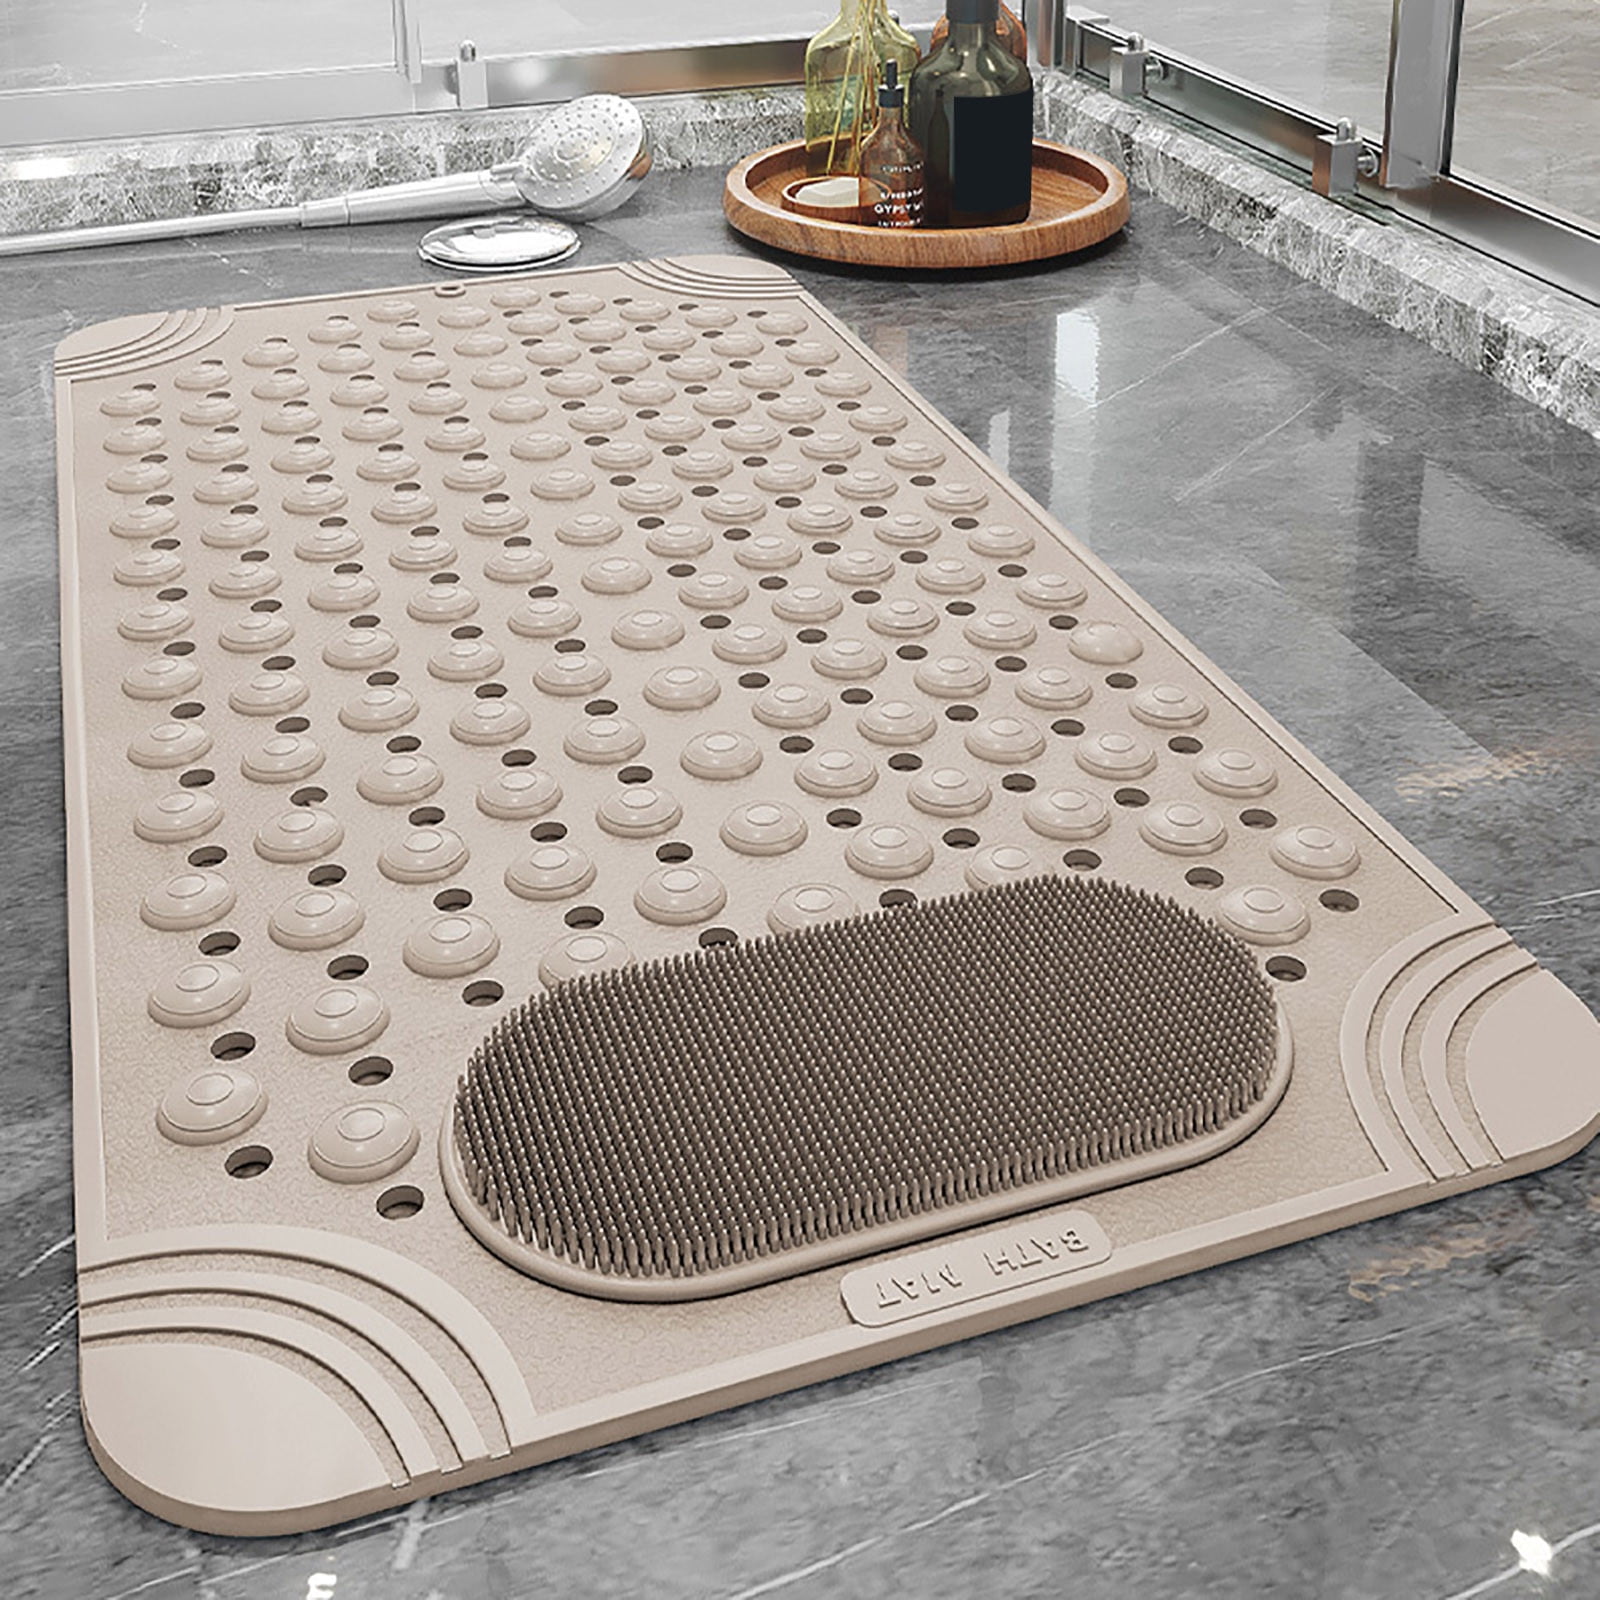 Wozhidaose Bathroom Organizer Foot Scrubber Shower Mat with Pumice Feet Scrub Stone Bathtub Mat with Antislip Suction Cups and Drain Holes Non Slip